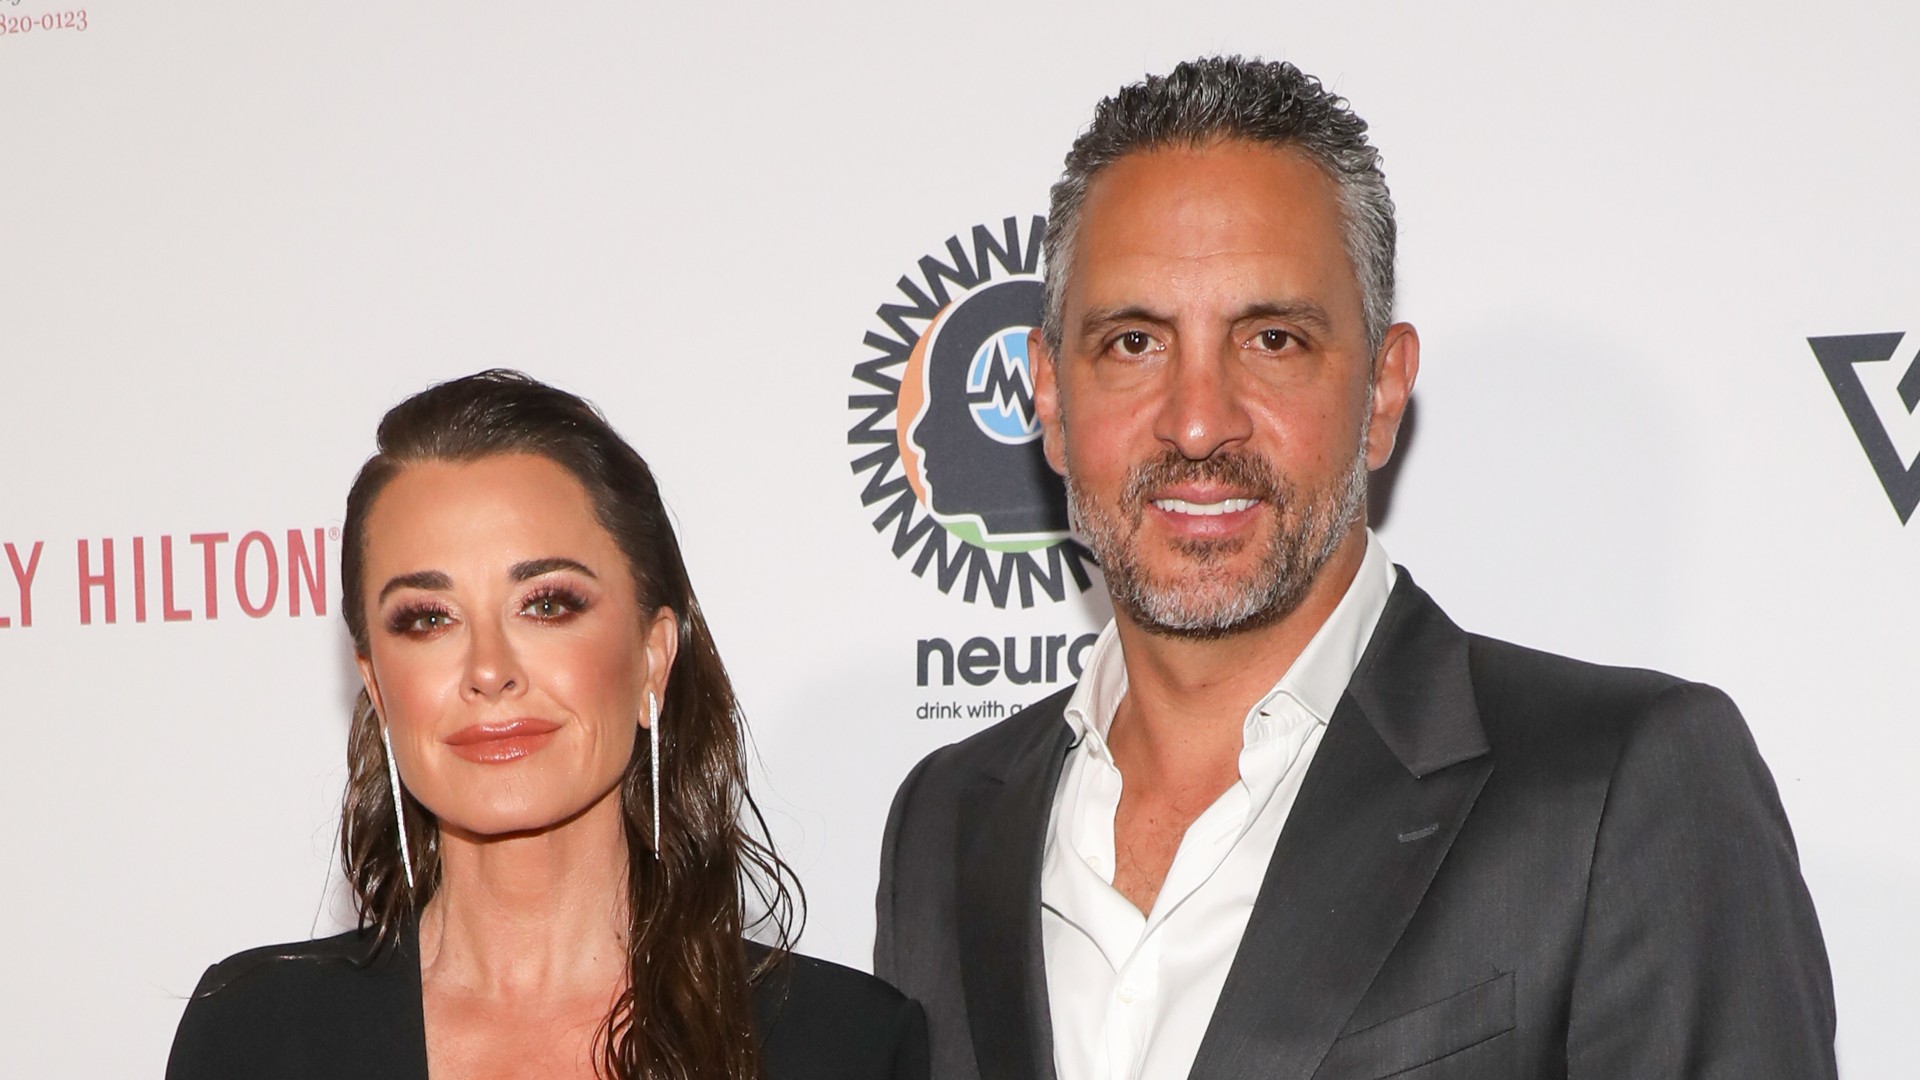 RHOBH’s Kyle Richards Reveals She And Mauricio Umansky Still Live Together Despite Being Separated thumbnail